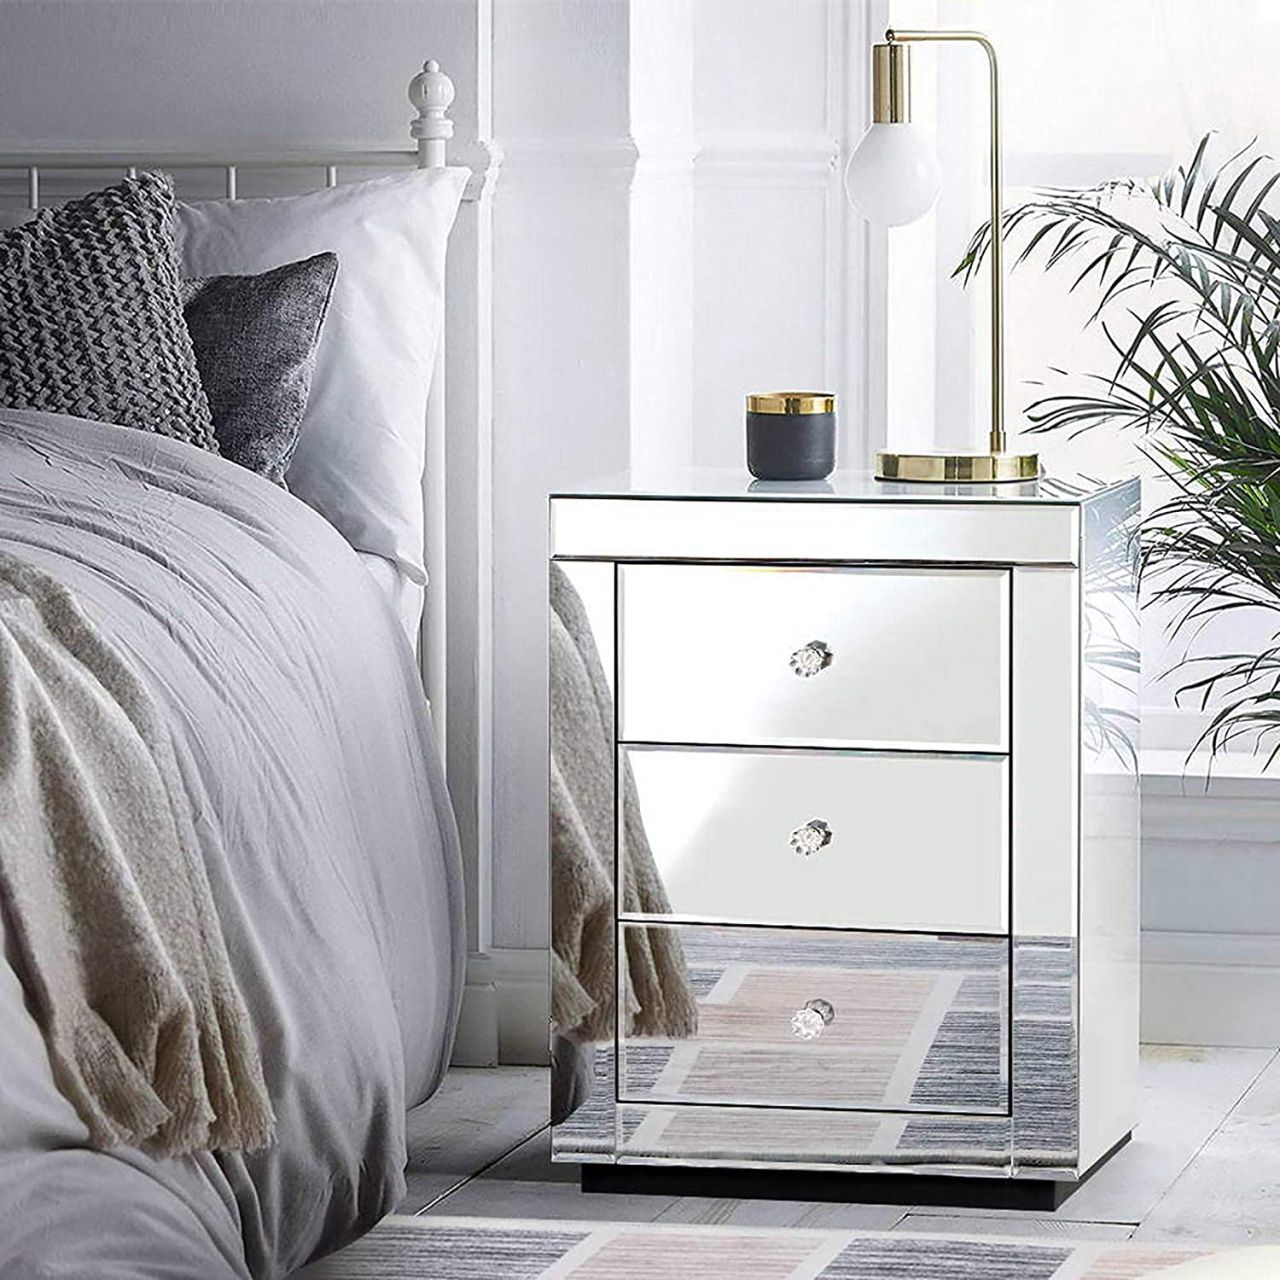 These Affordable Bedside Tables Will Look Better Than That Dusty Stack of Books